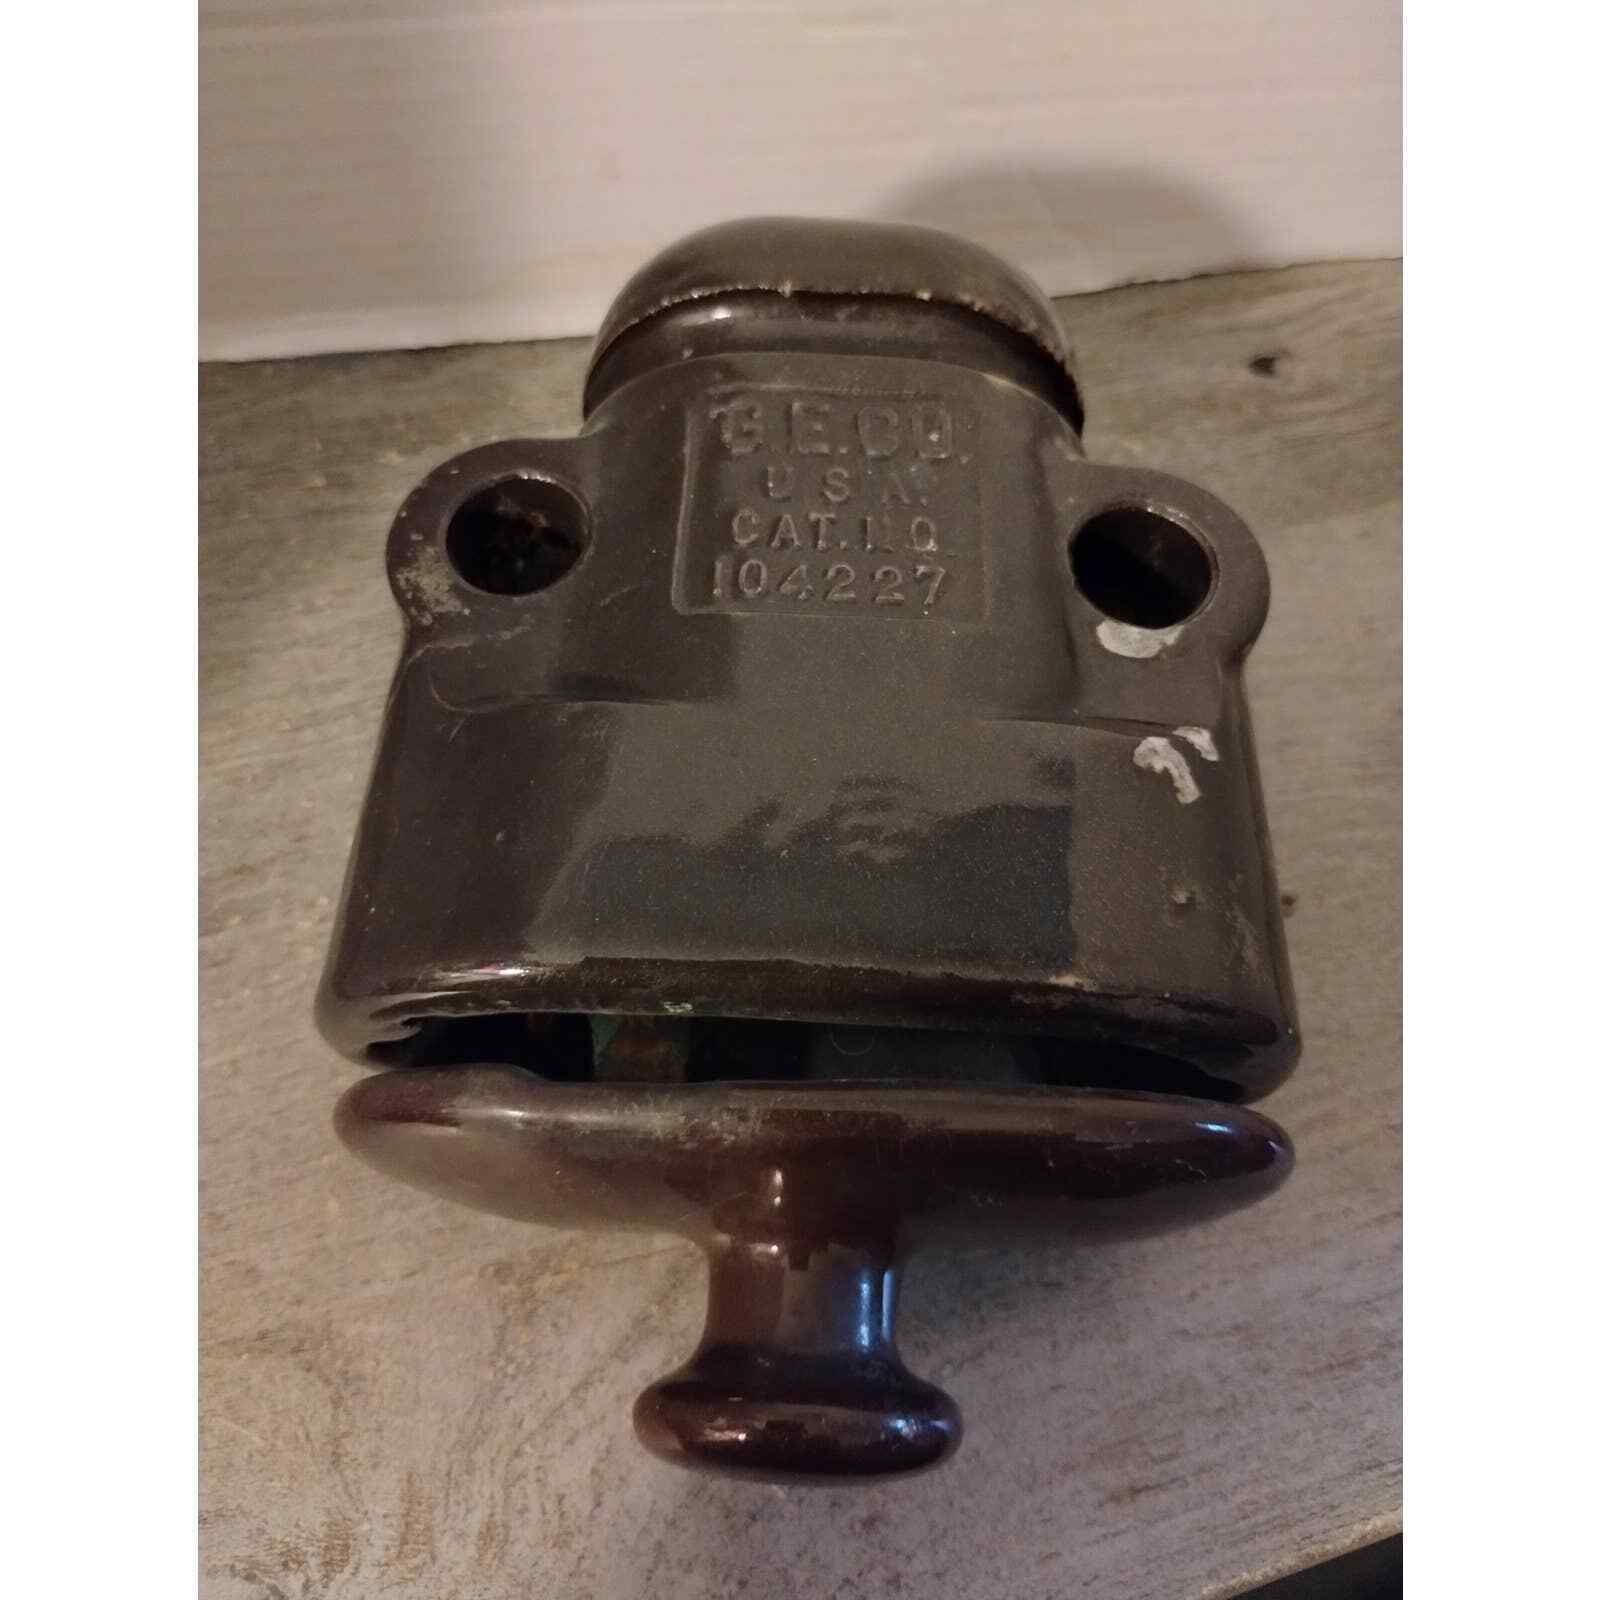 1903 Vintage GE CO General Electric Cat No. 104227 Insulator Fuse Cutout Box